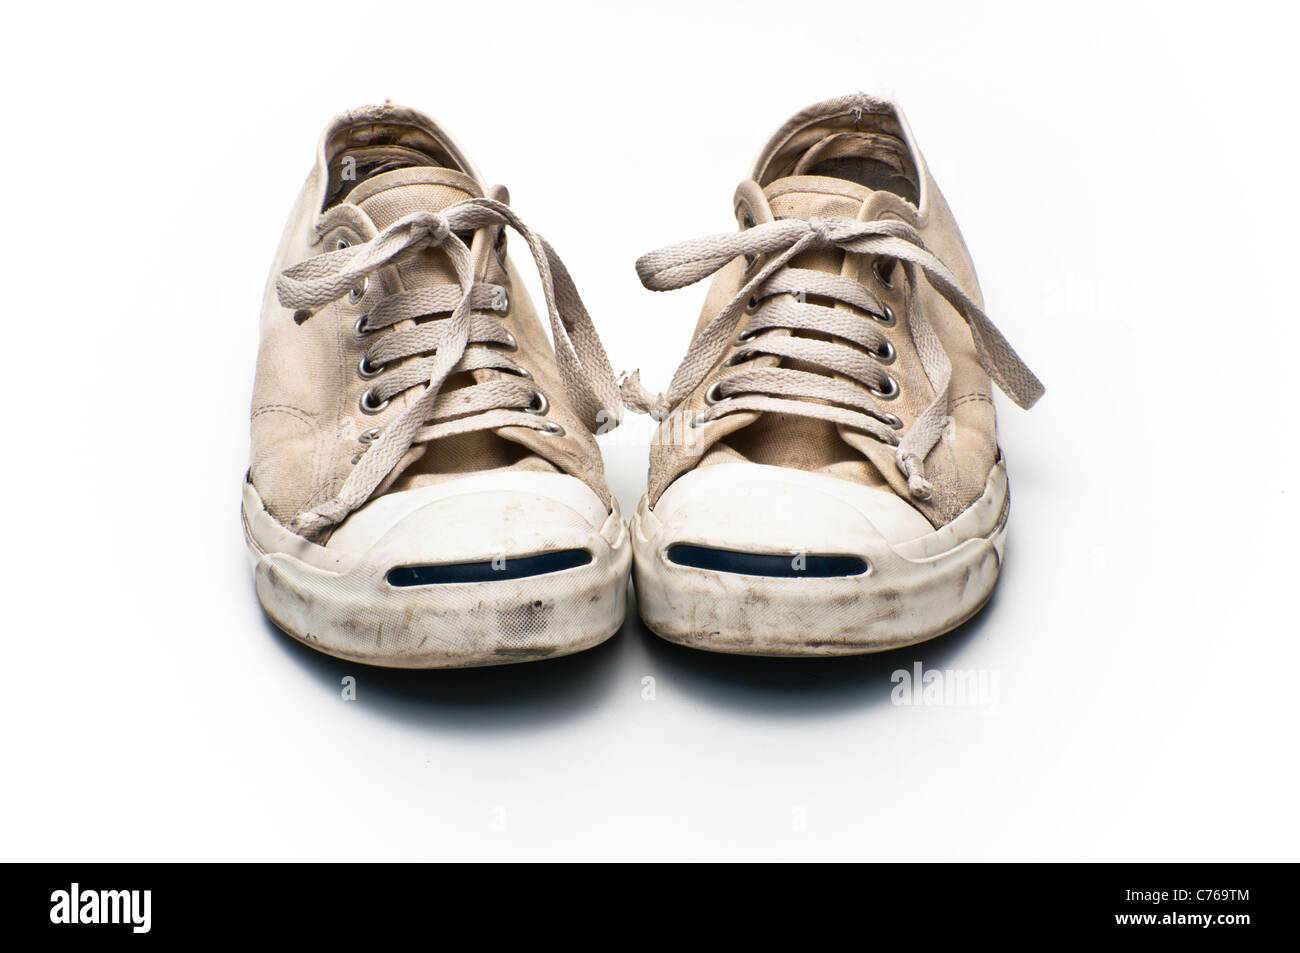 Converse Jack Purcell tennis shoes on a white background Stock Photo - Alamy